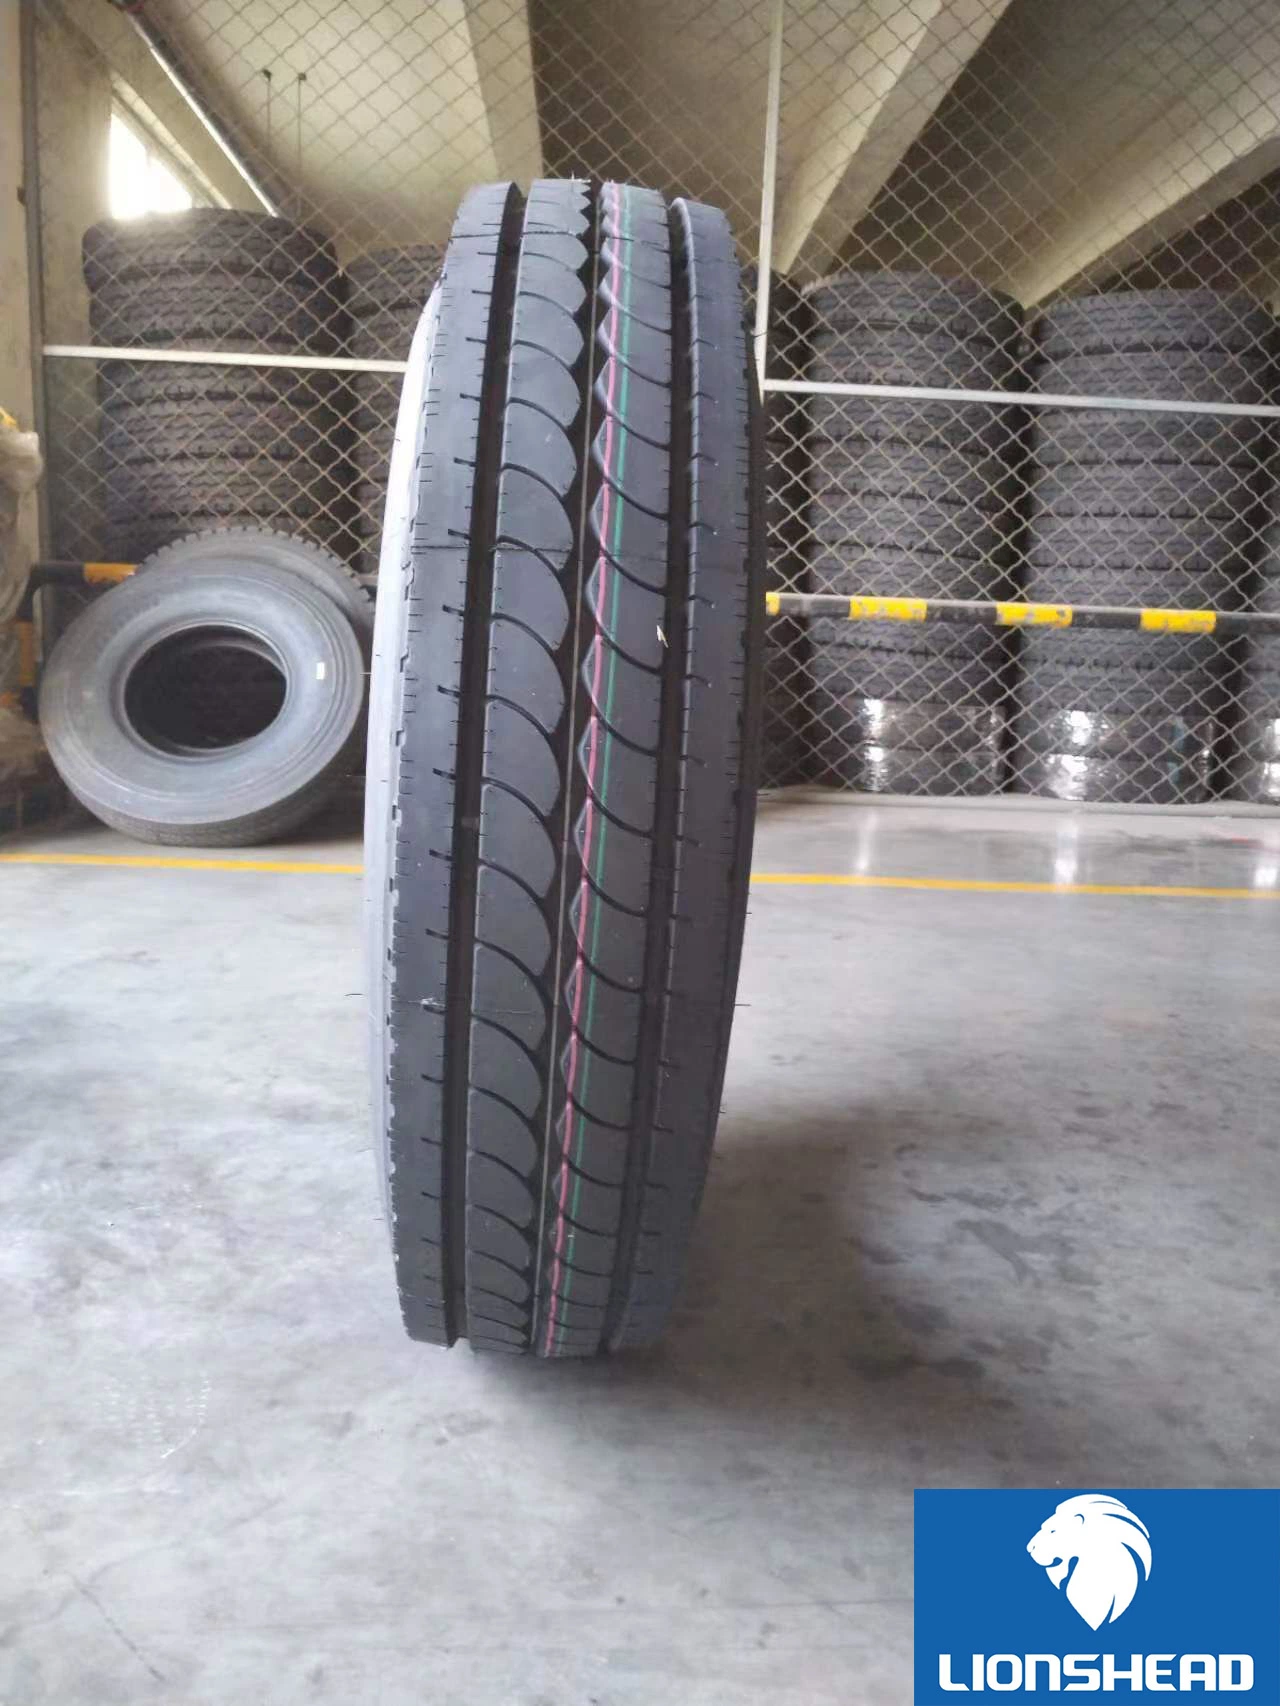 Wholesale/Supplier Best Price Brand Original Factory Price Steel Radial TBR Truck Bus Tire with Cheap Price 315/80r22.5 11r22.5 12r22.5 1200r20 1200r24